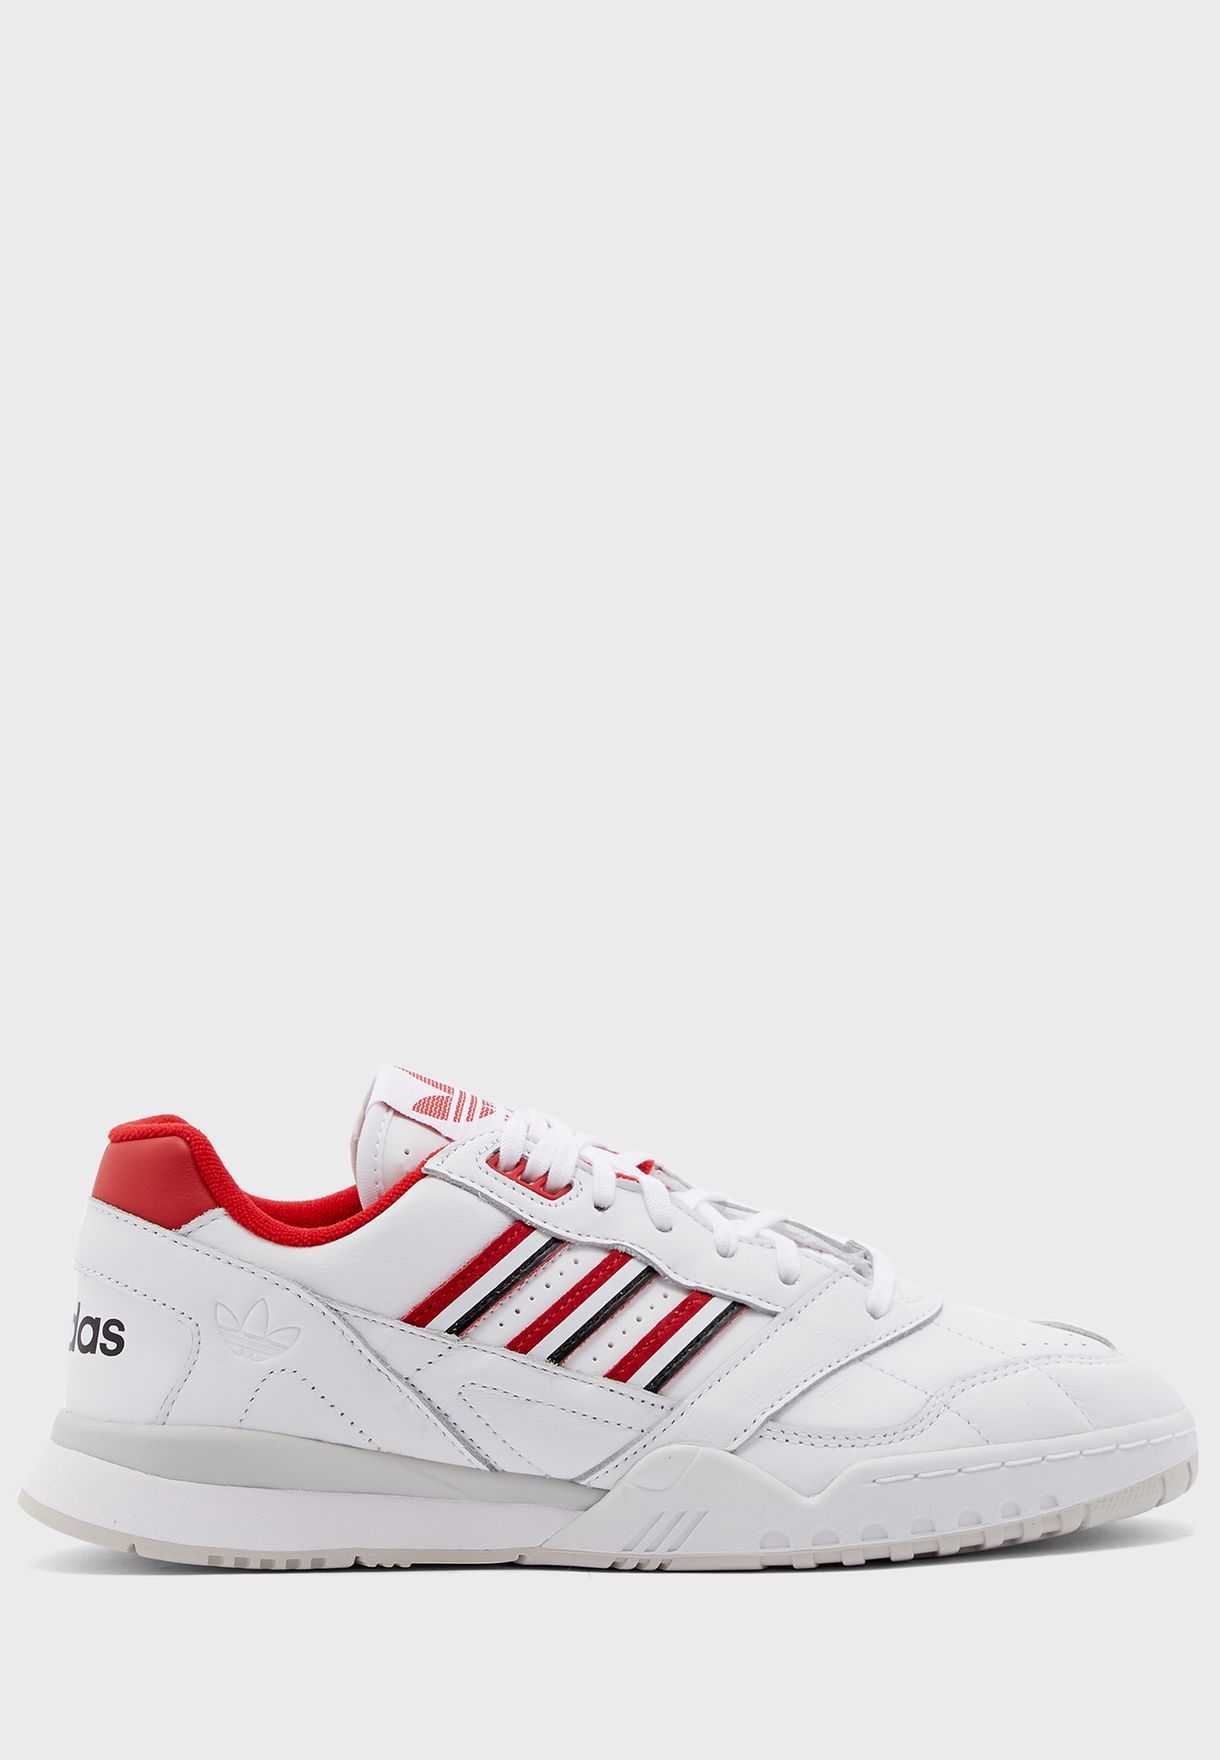 ar trainer shoes adidas